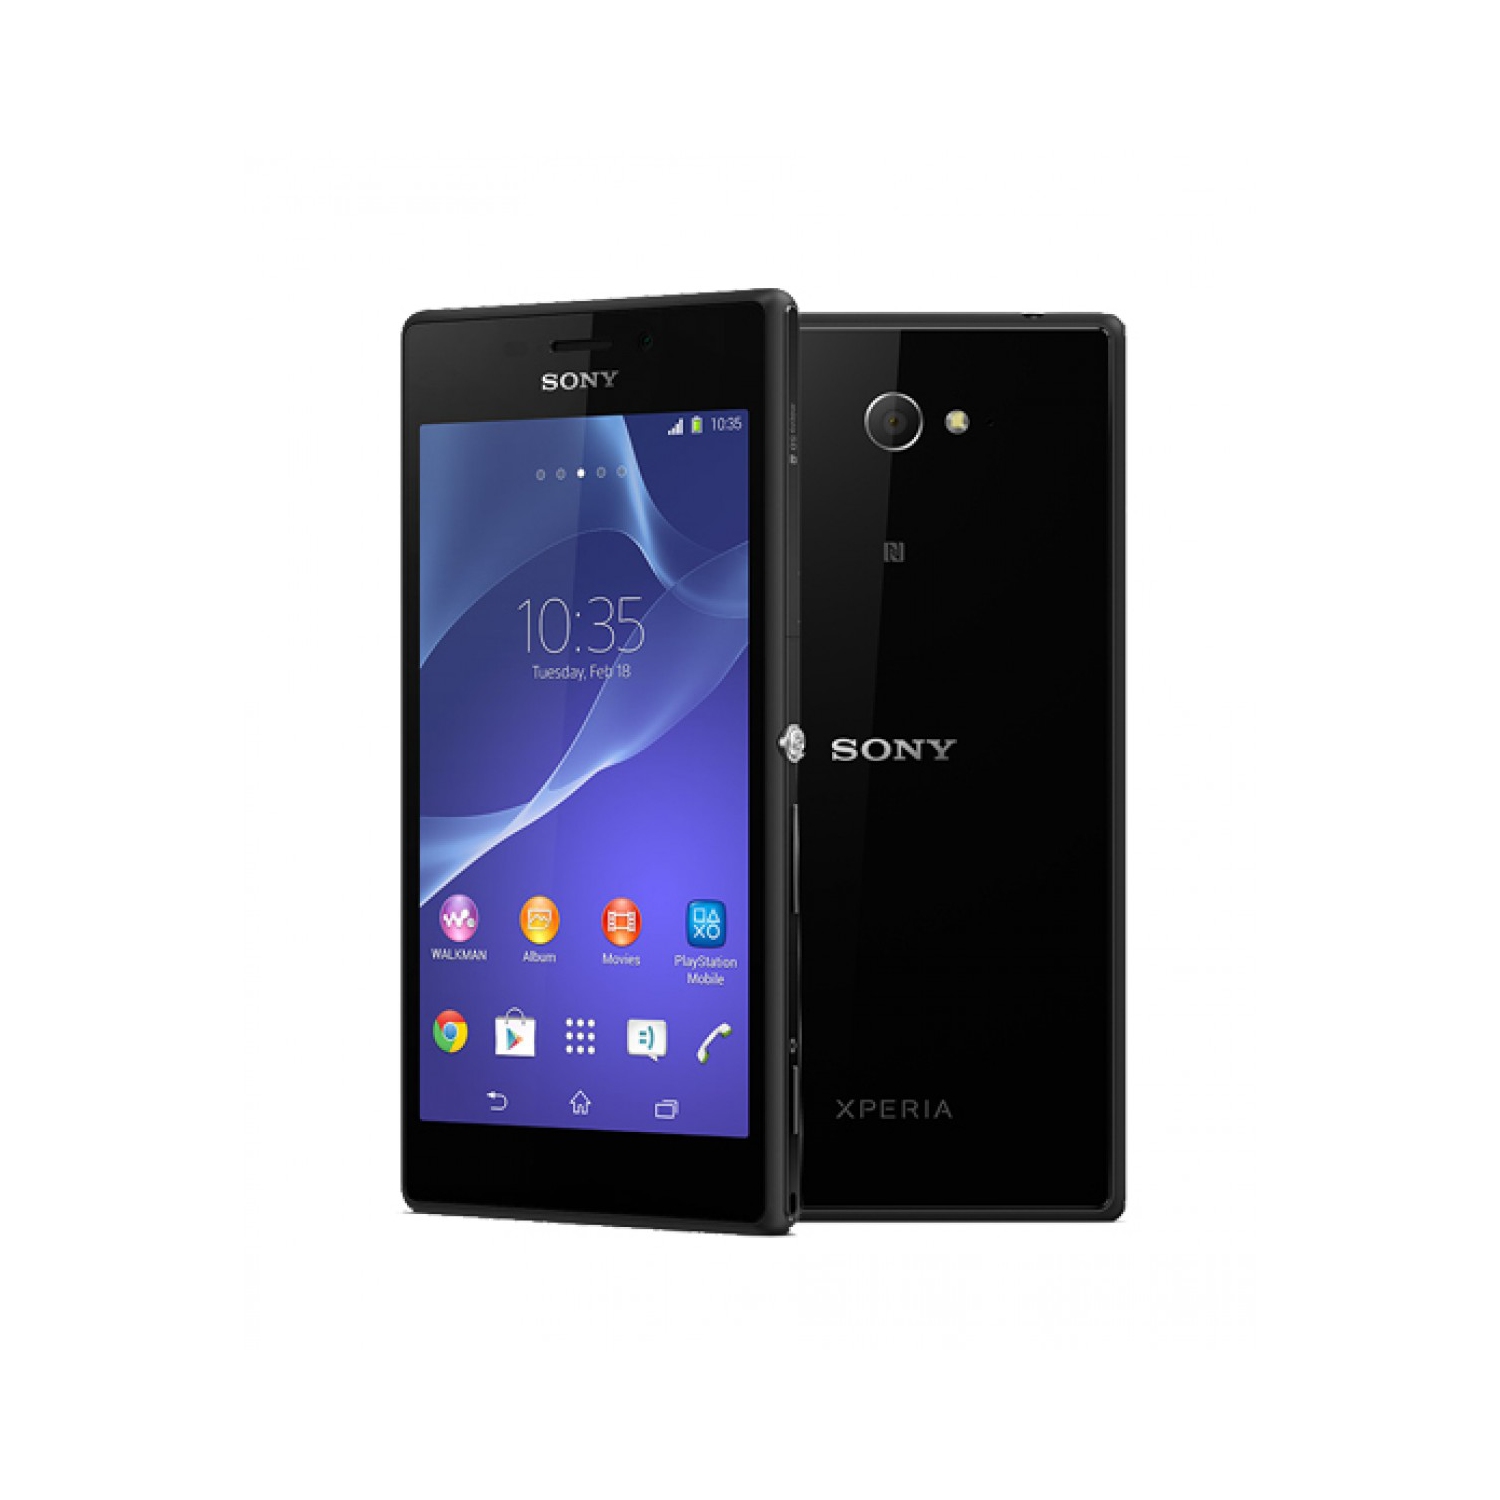 Refurbished (Excellent) - Sony Xperia M2 D2406 LTE 8 GB - Unlocked